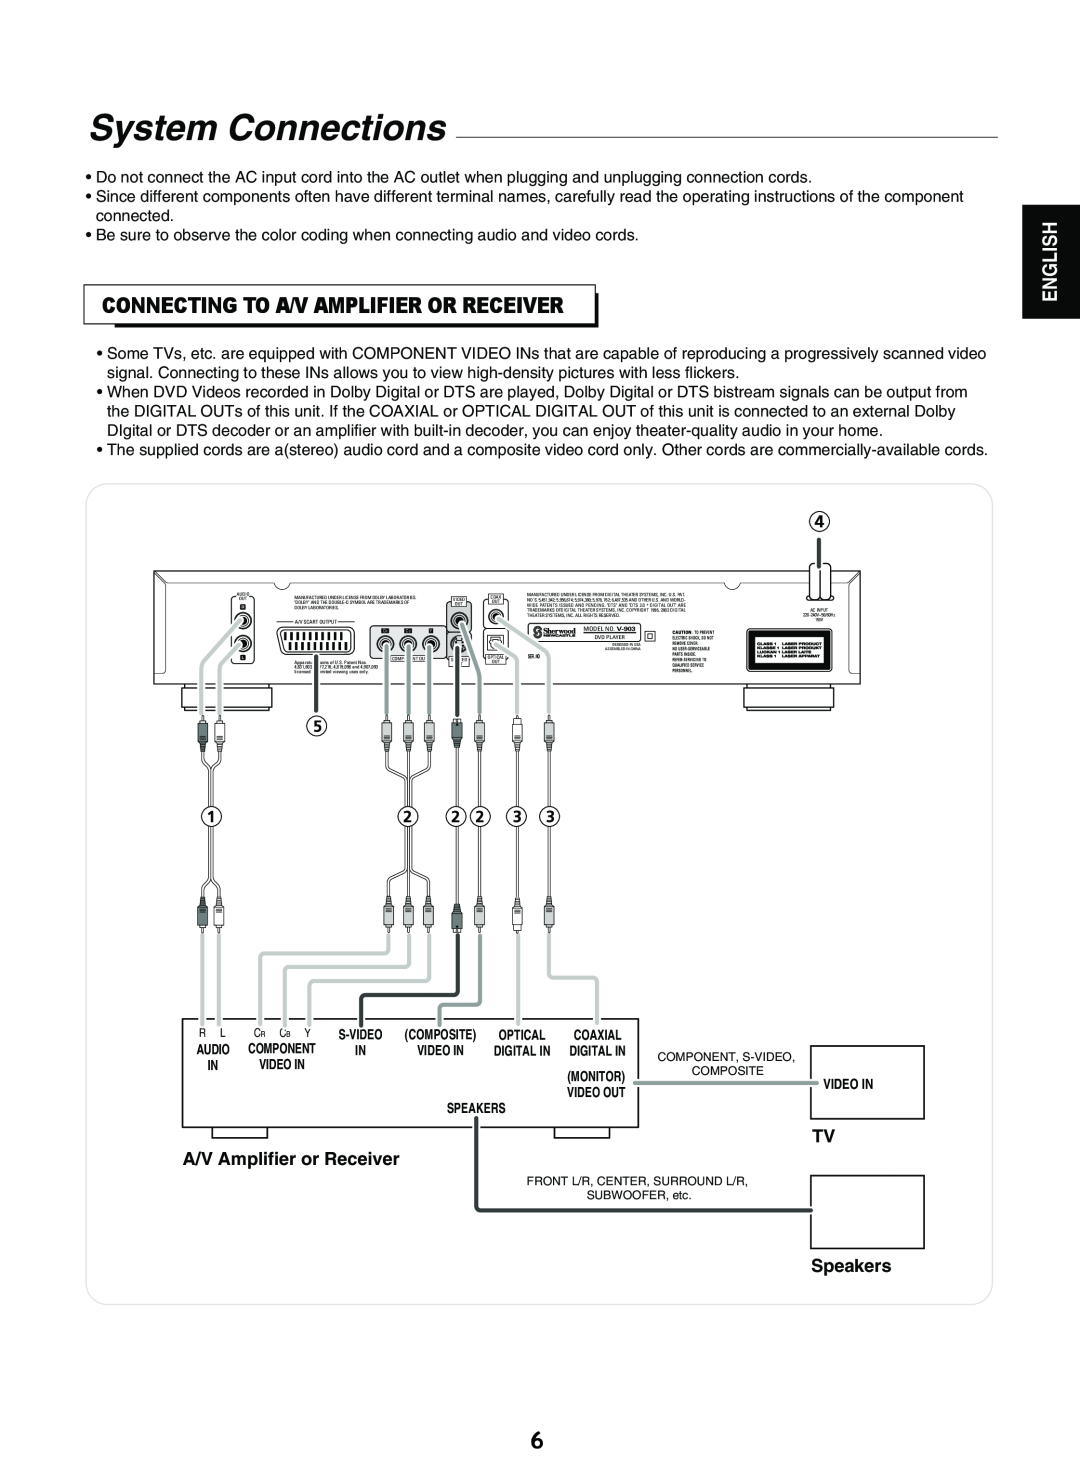 Sherwood V-903 manual System Connections, Connecting To A/V Amplifier Or Receiver, English, TV A/V Amplifier or Receiver 